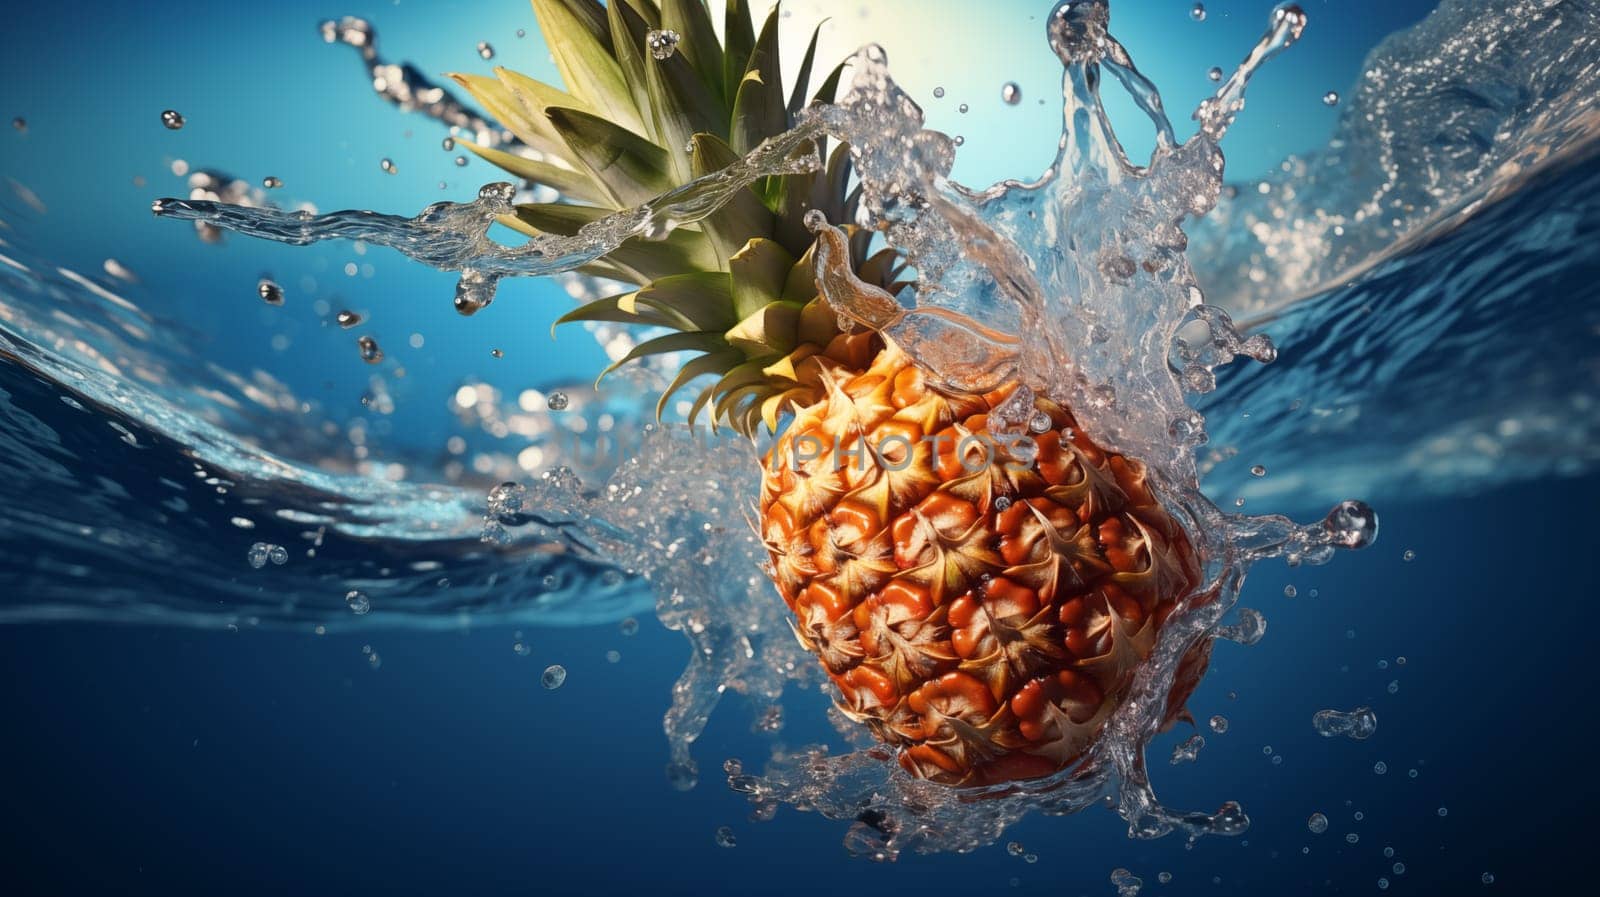 Fresh pineapple falls under blue water, with splashes and air bubbles. Close up